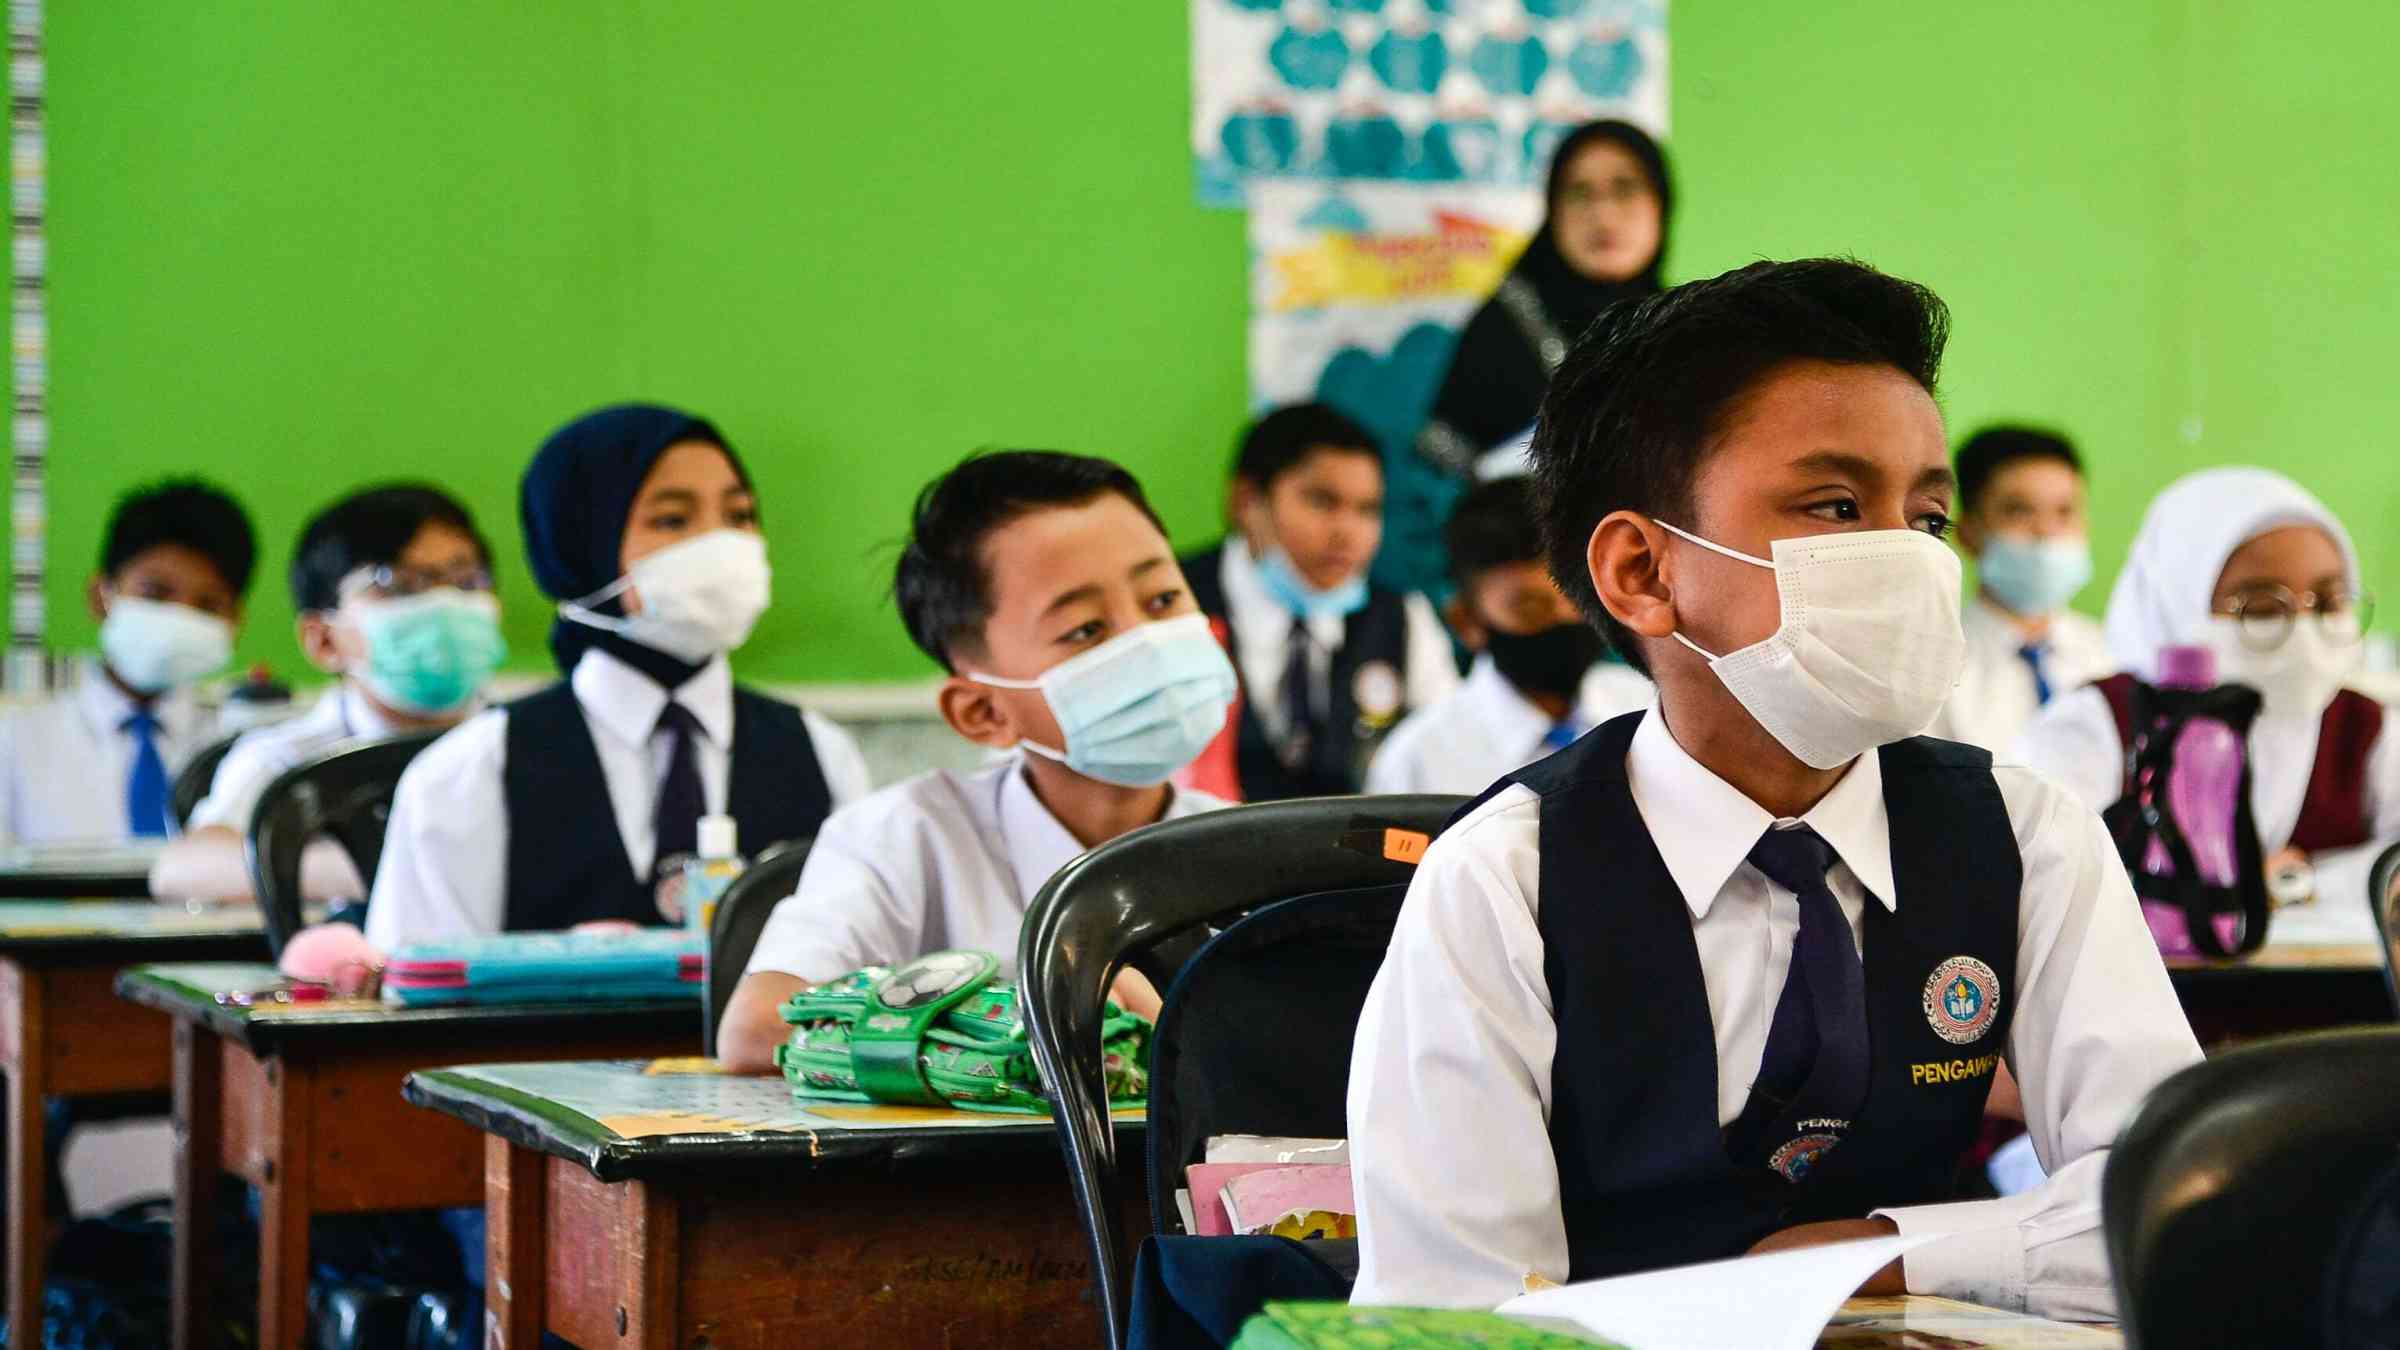 Students attend class while wearing masks in Shah Alam, Malaysia